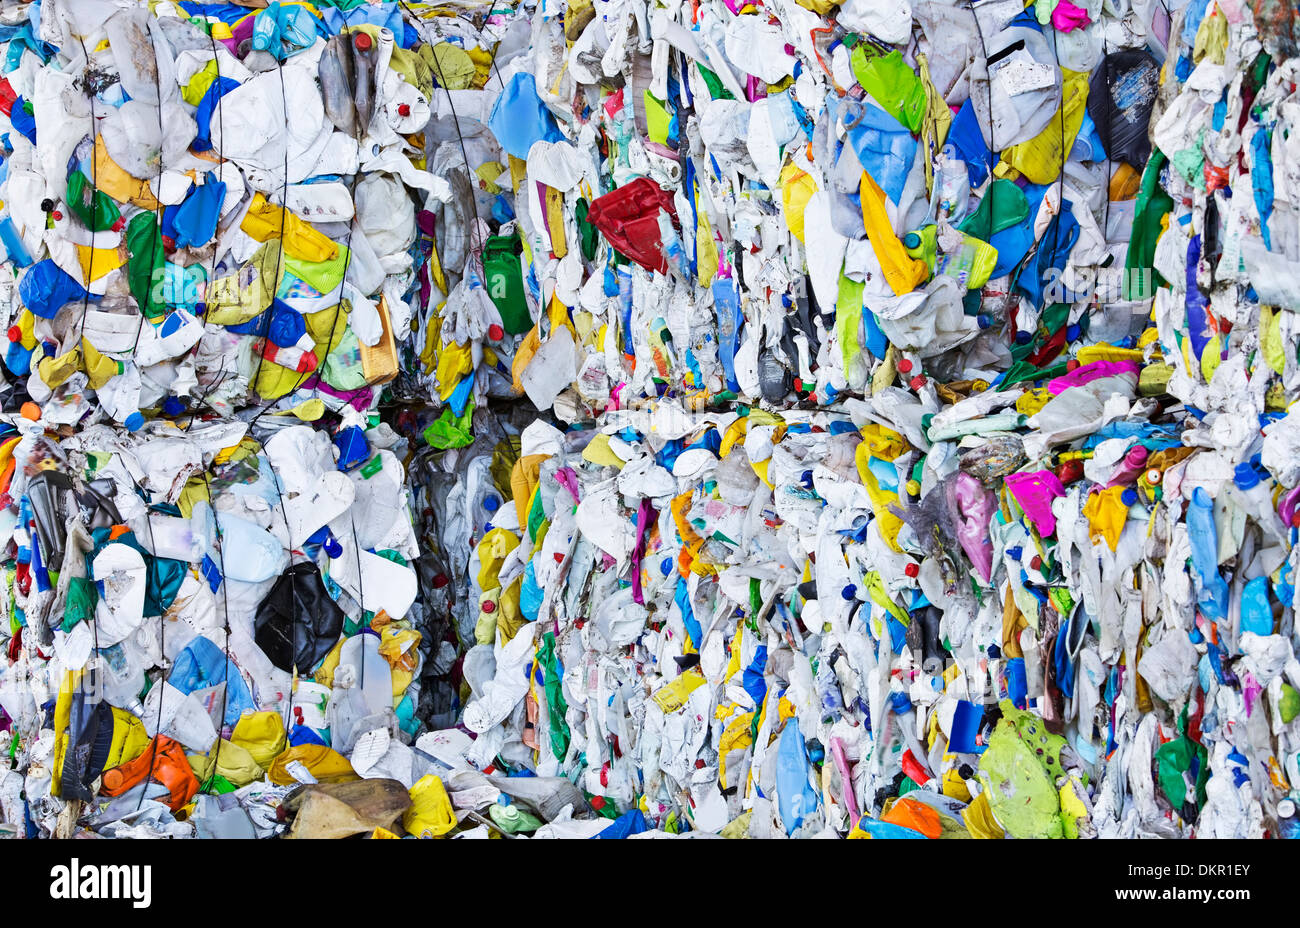 Compressed recycling bundles Stock Photo